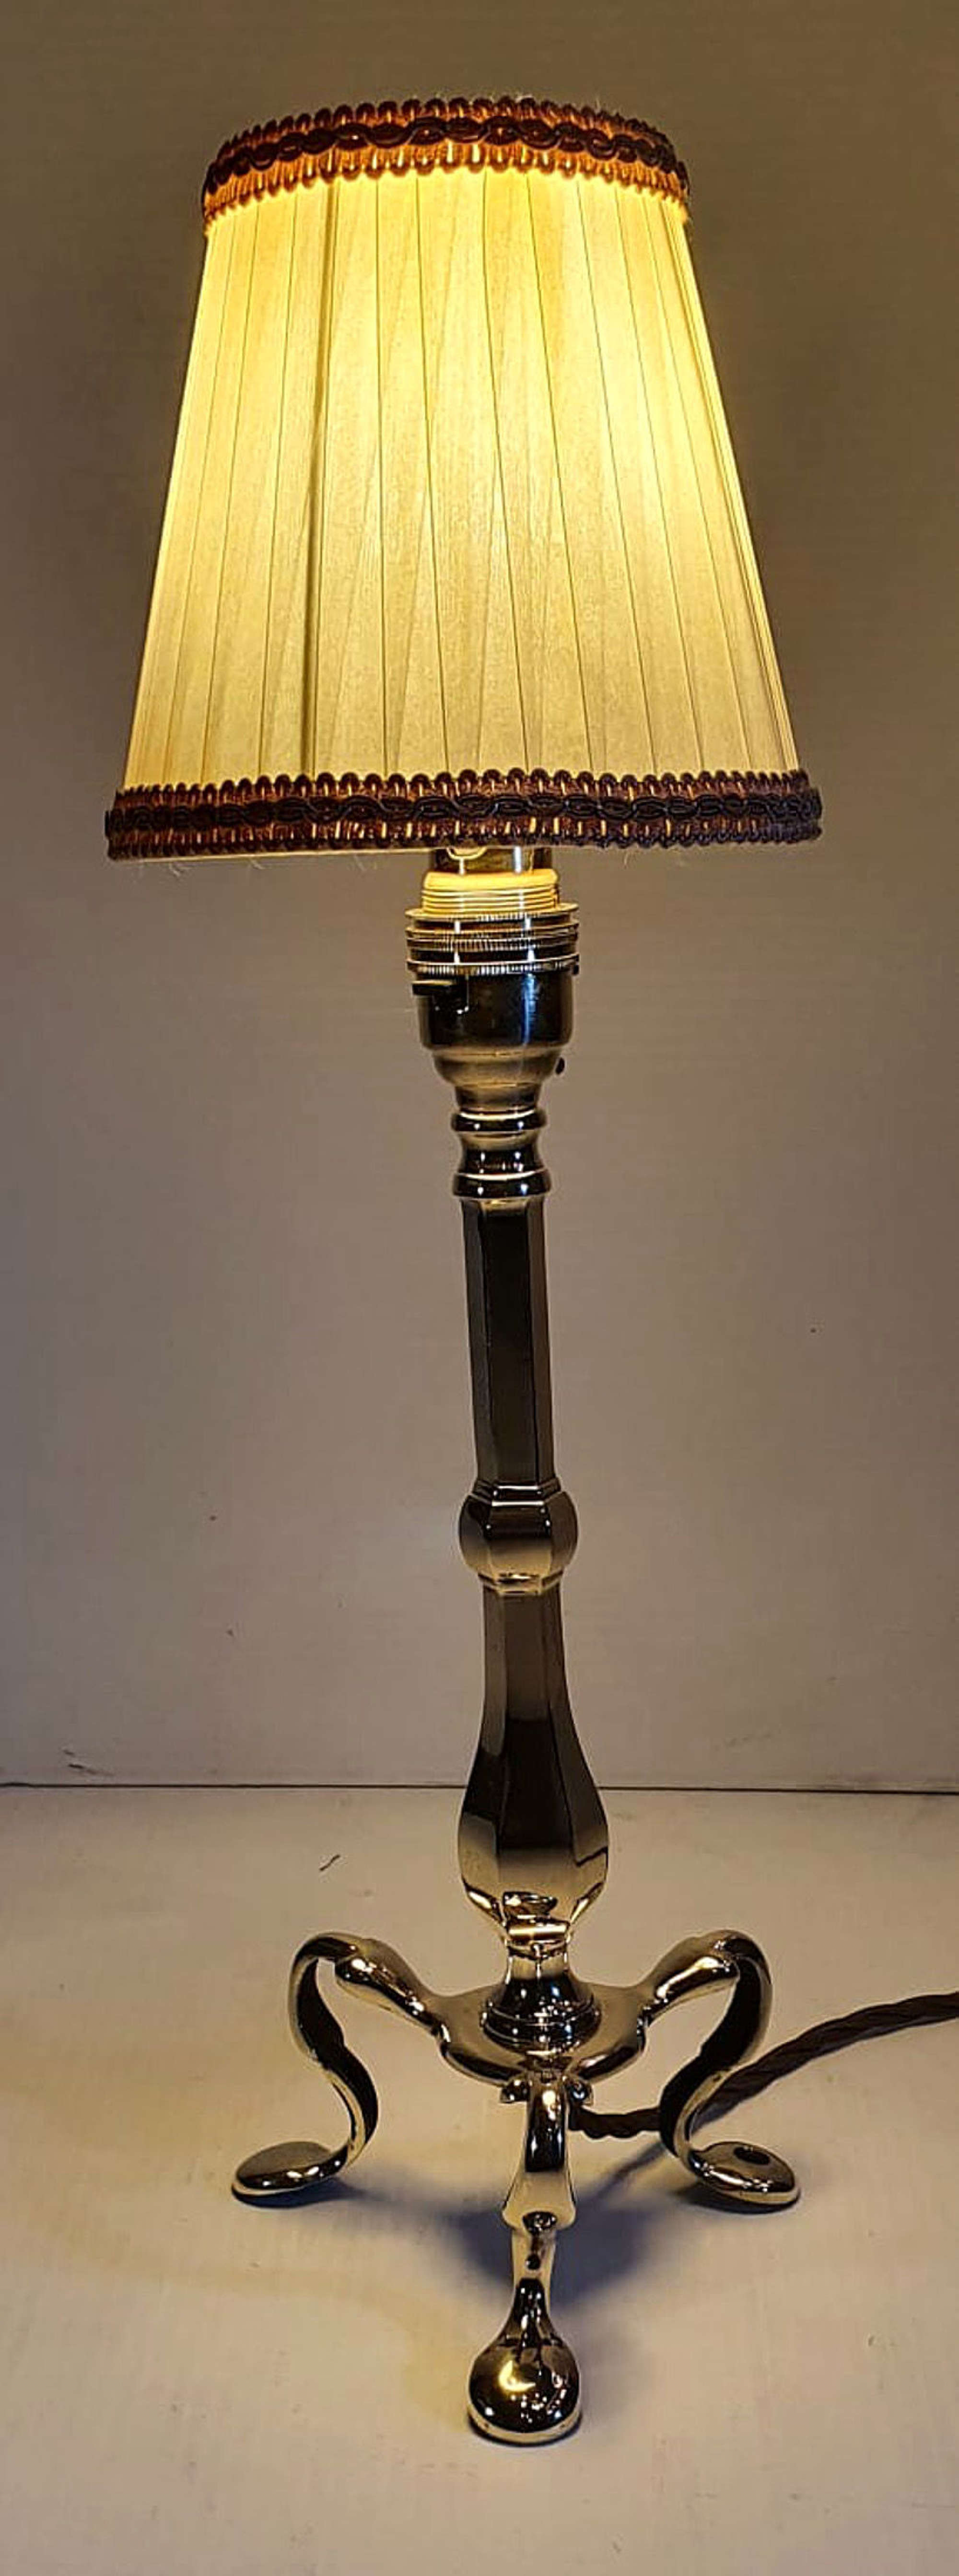 19th Century Brass Candlestick Converted To A Antique Table Lamp